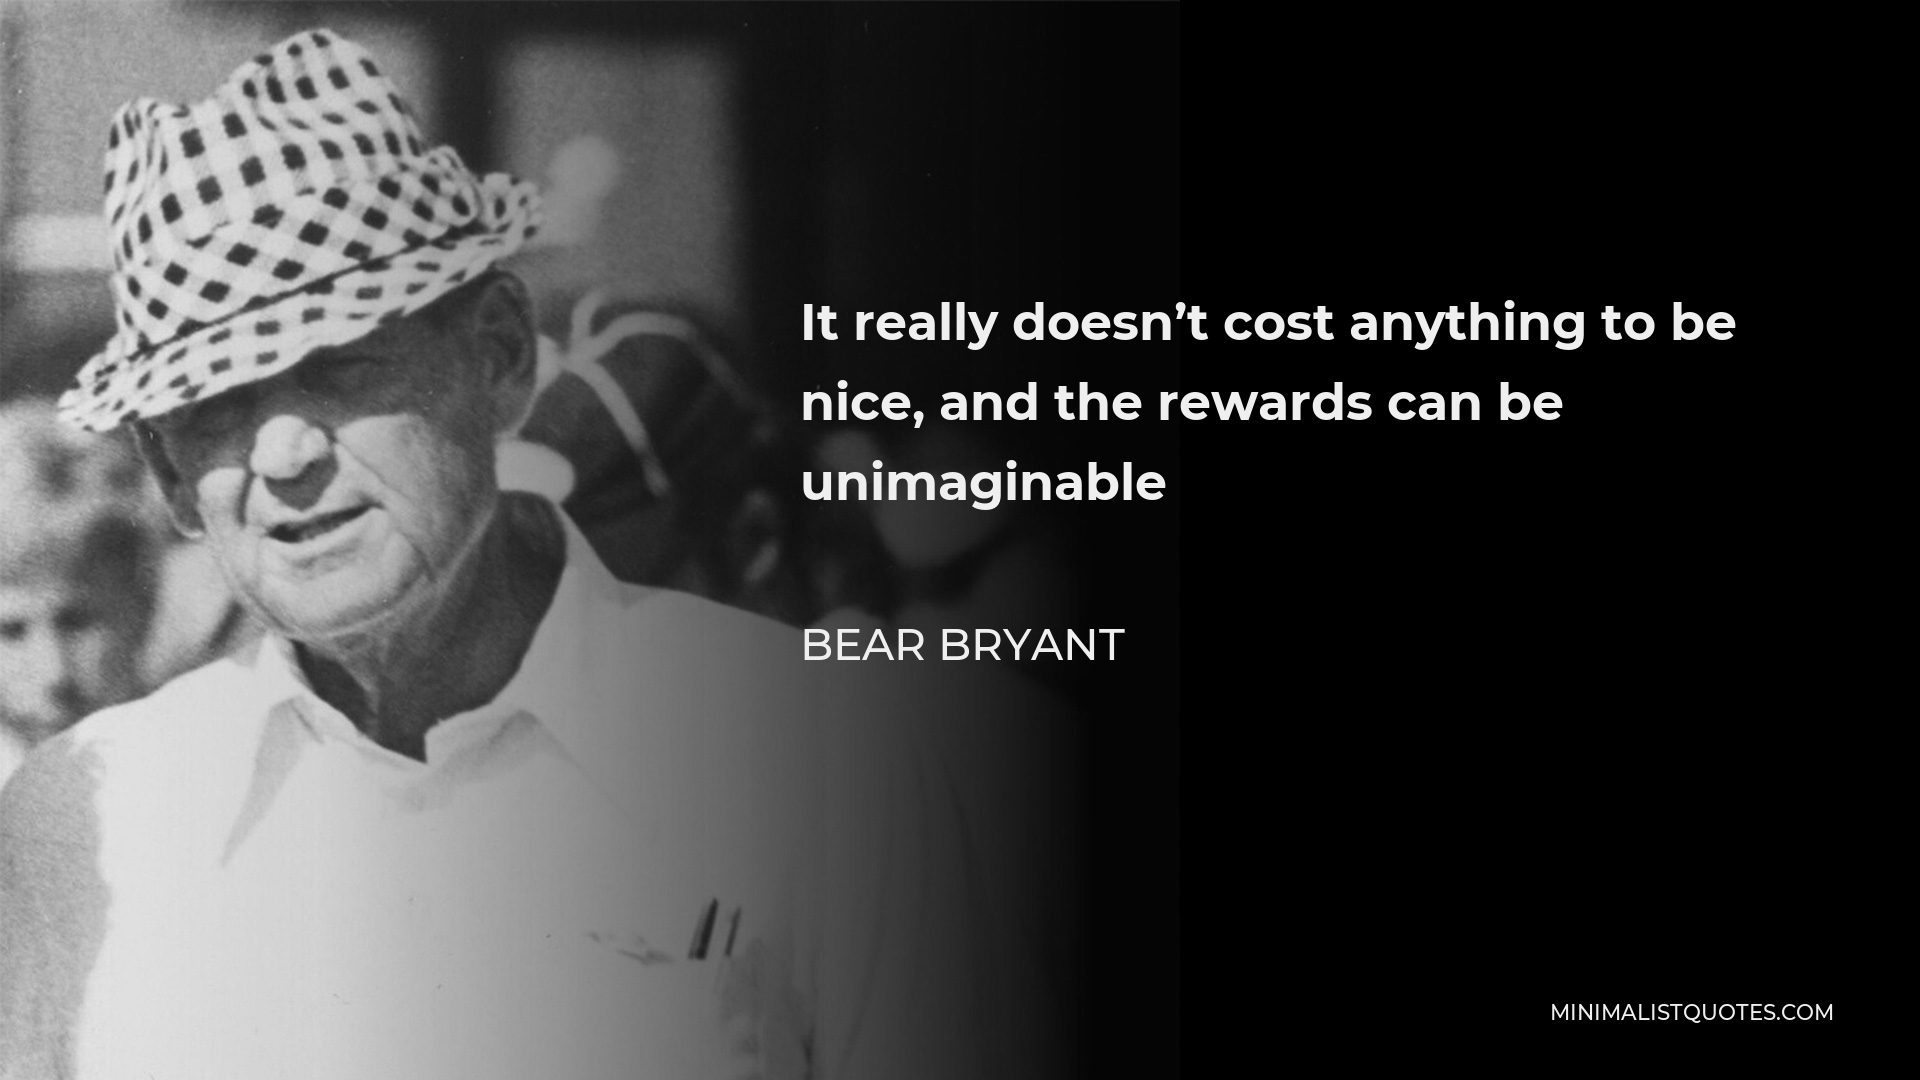 Bear Bryant Quote - It really doesn’t cost anything to be nice, and the rewards can be unimaginable